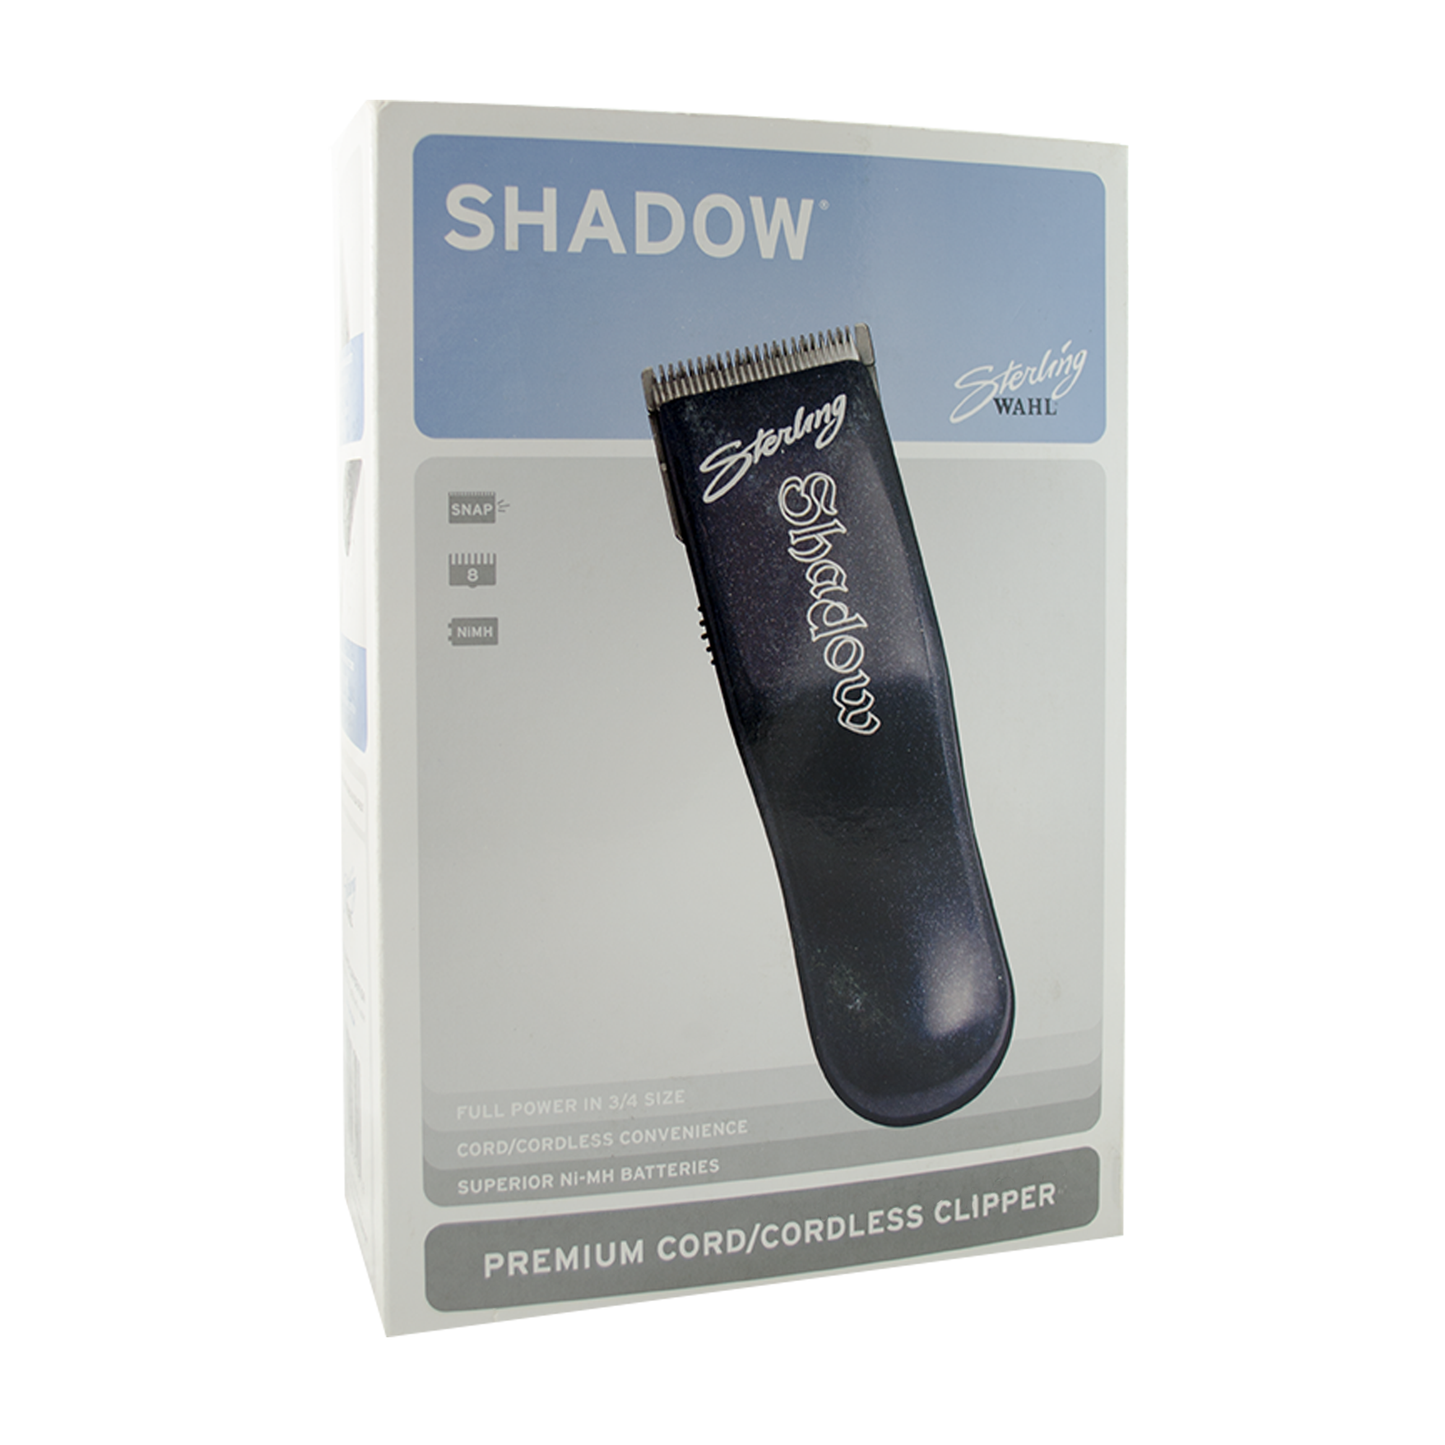 Maquina Wahl Sterling Shadow ¡REMATE!